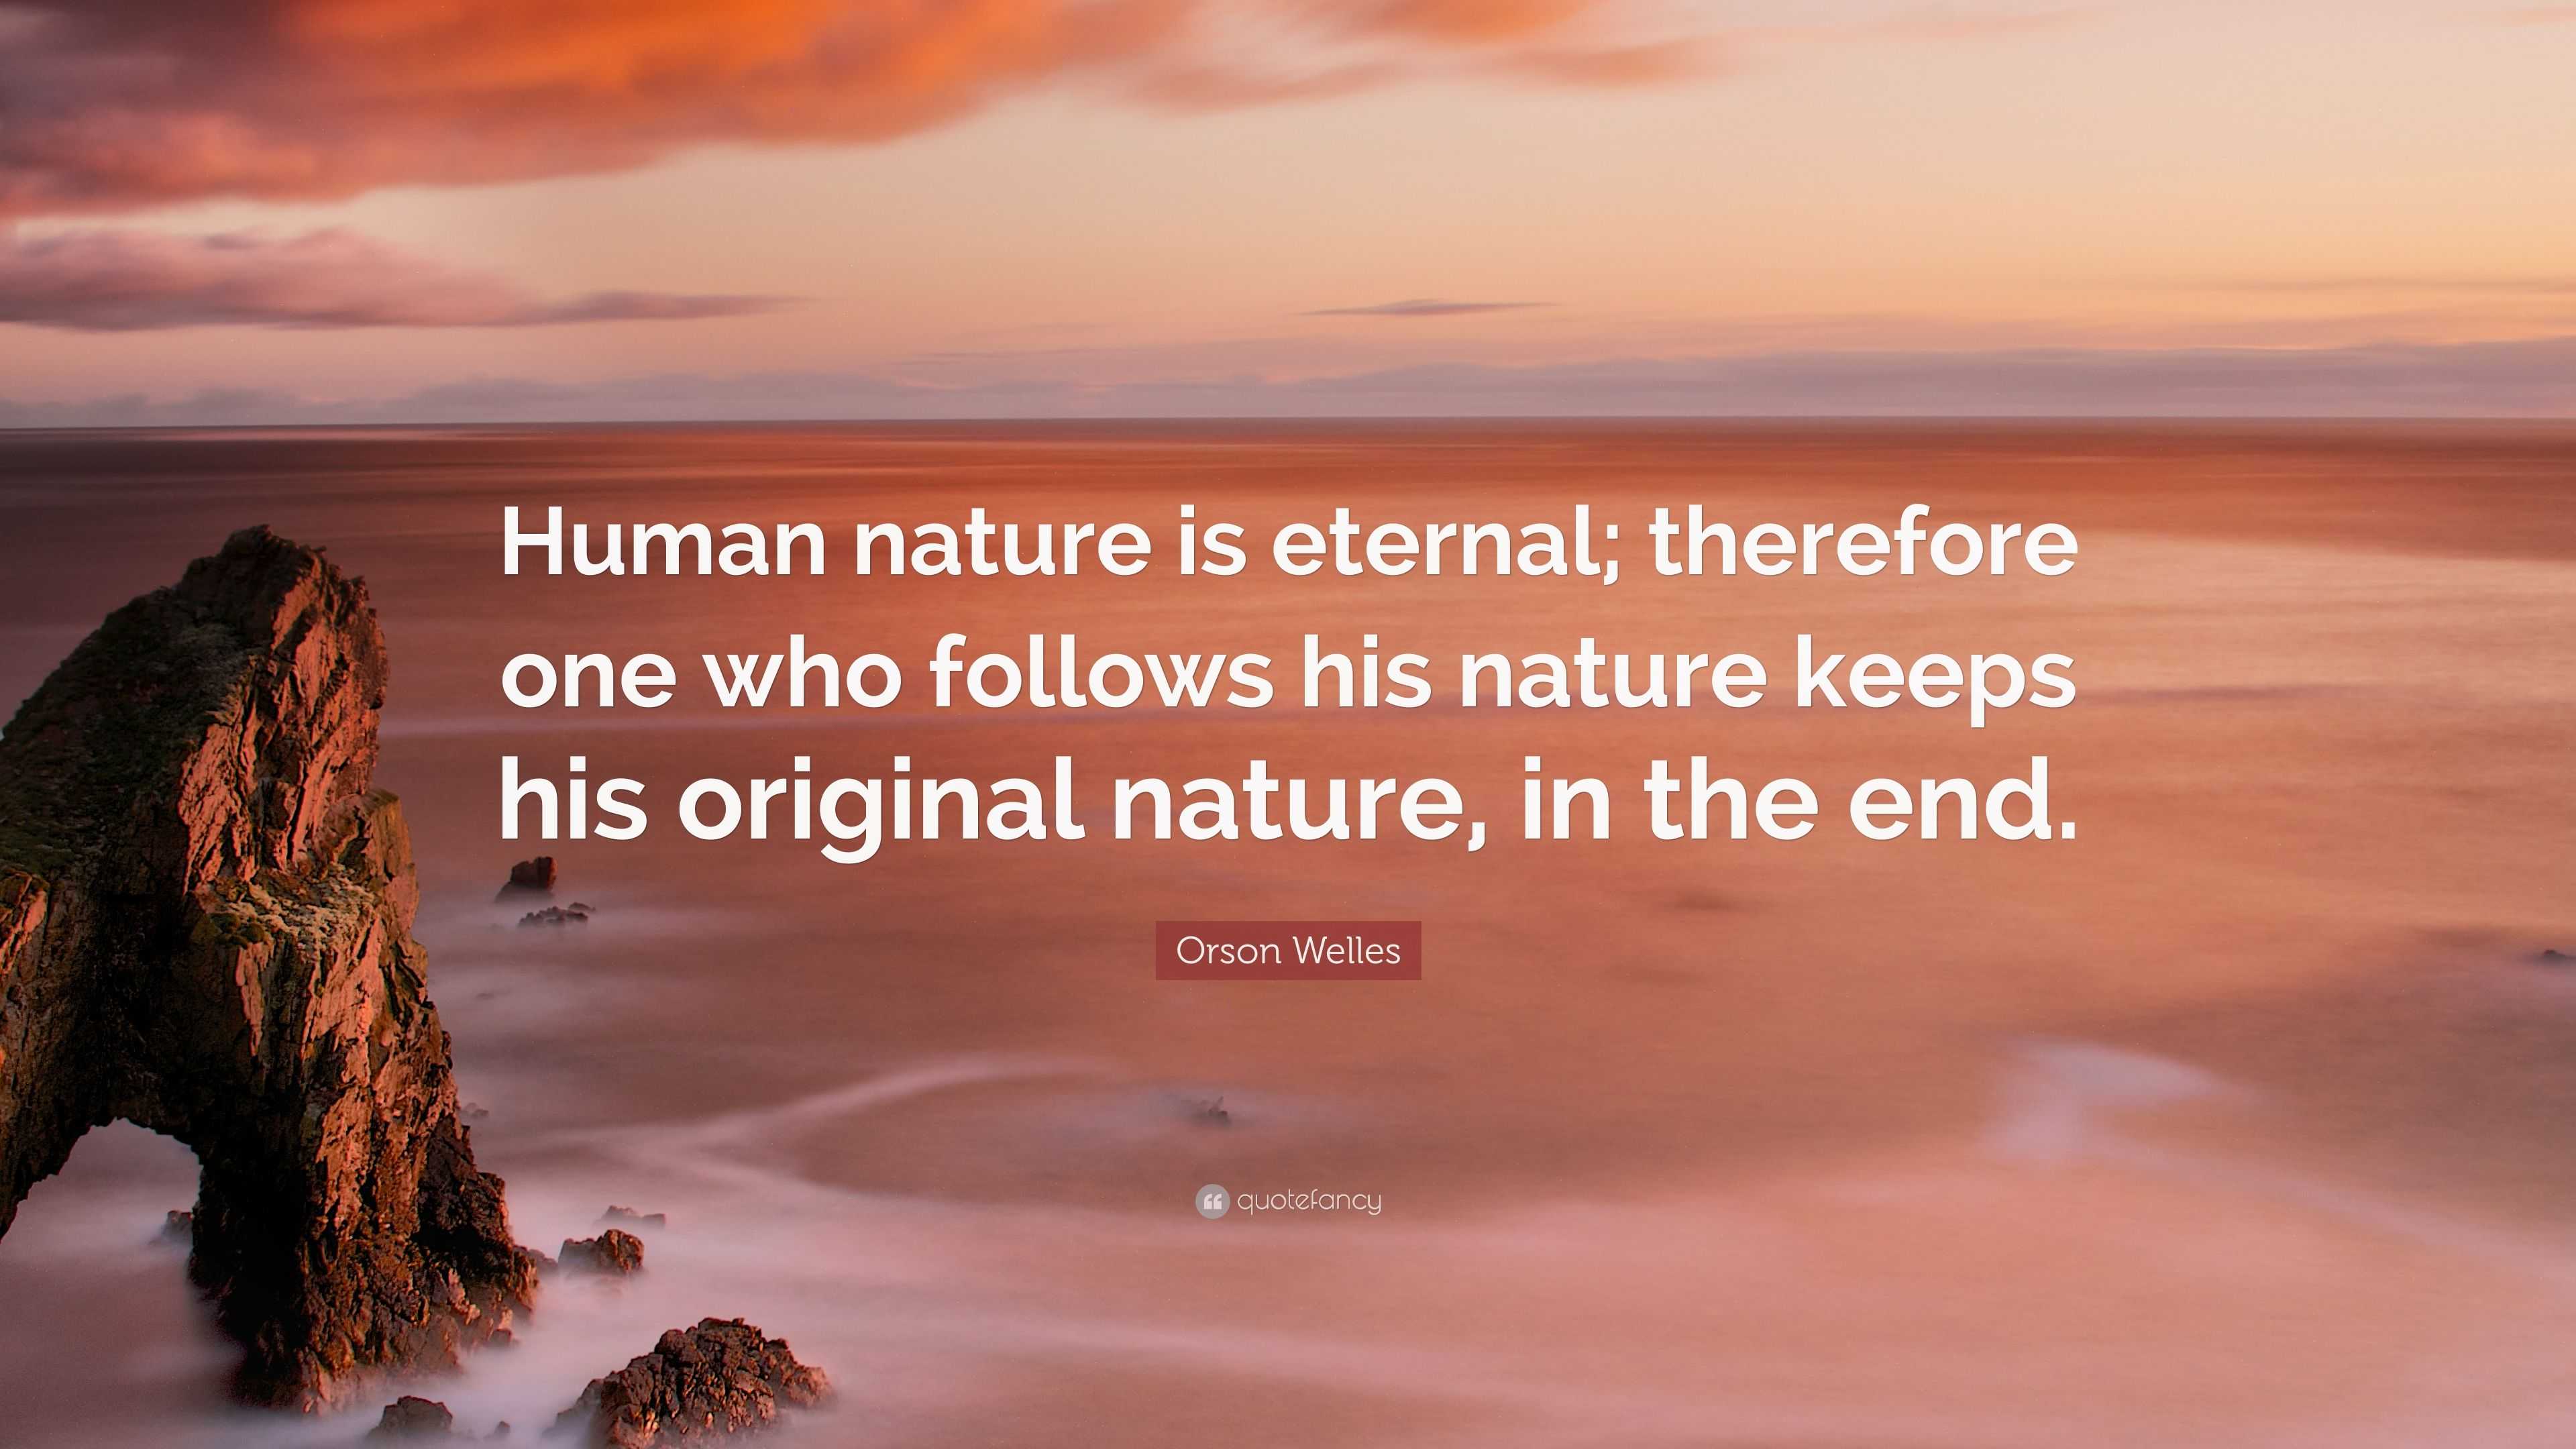 Orson Welles Quote: “Human nature is eternal; therefore one who follows